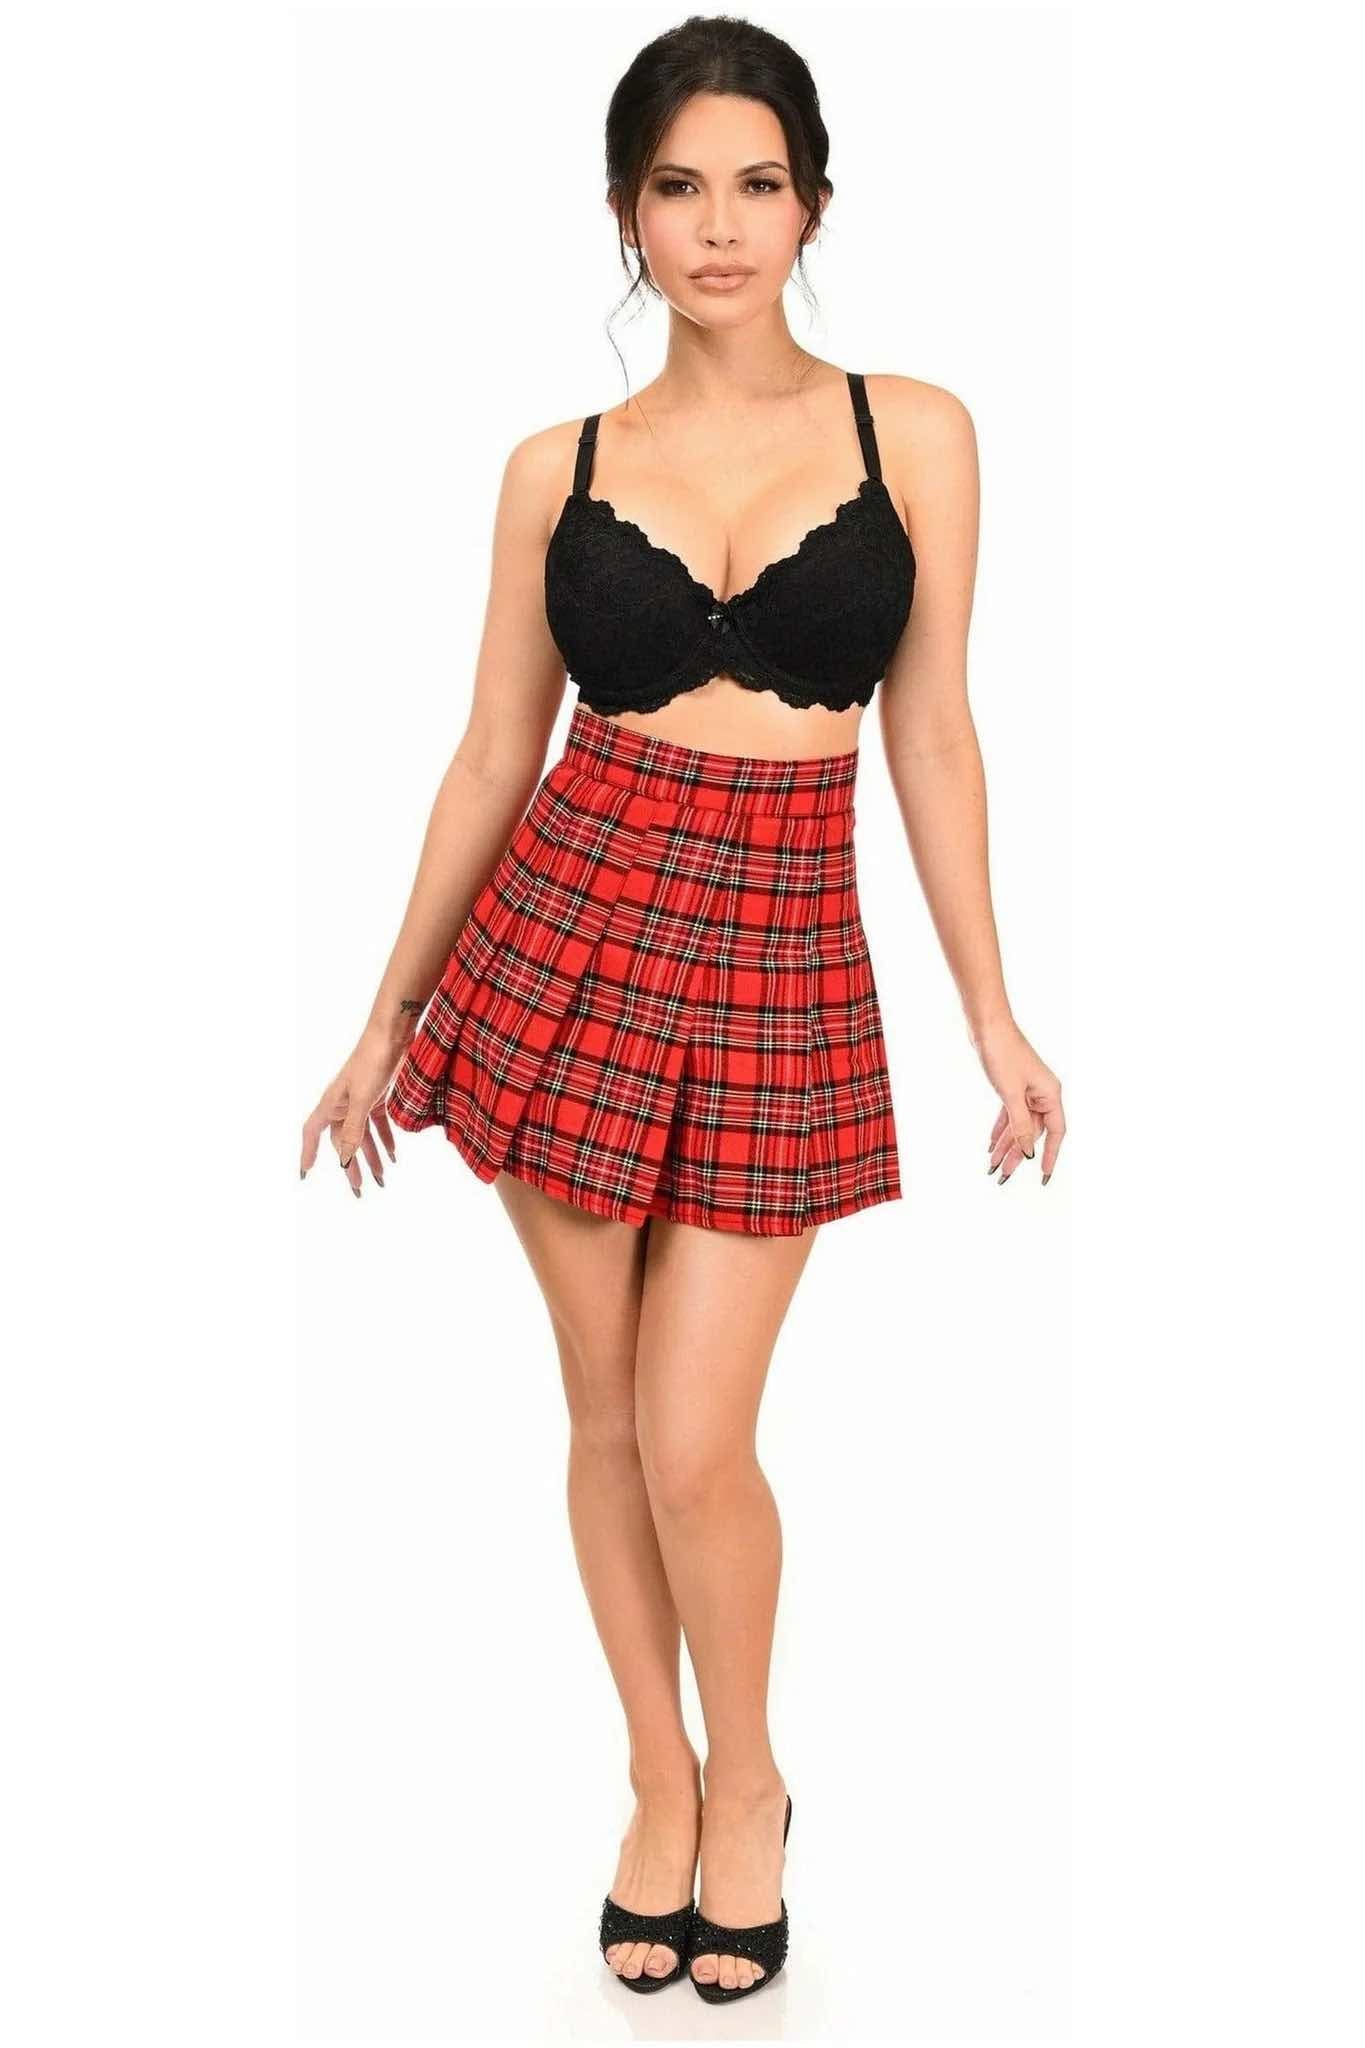 A model wearing a black bra, black heels and the Red Plaid Skirt, front view.